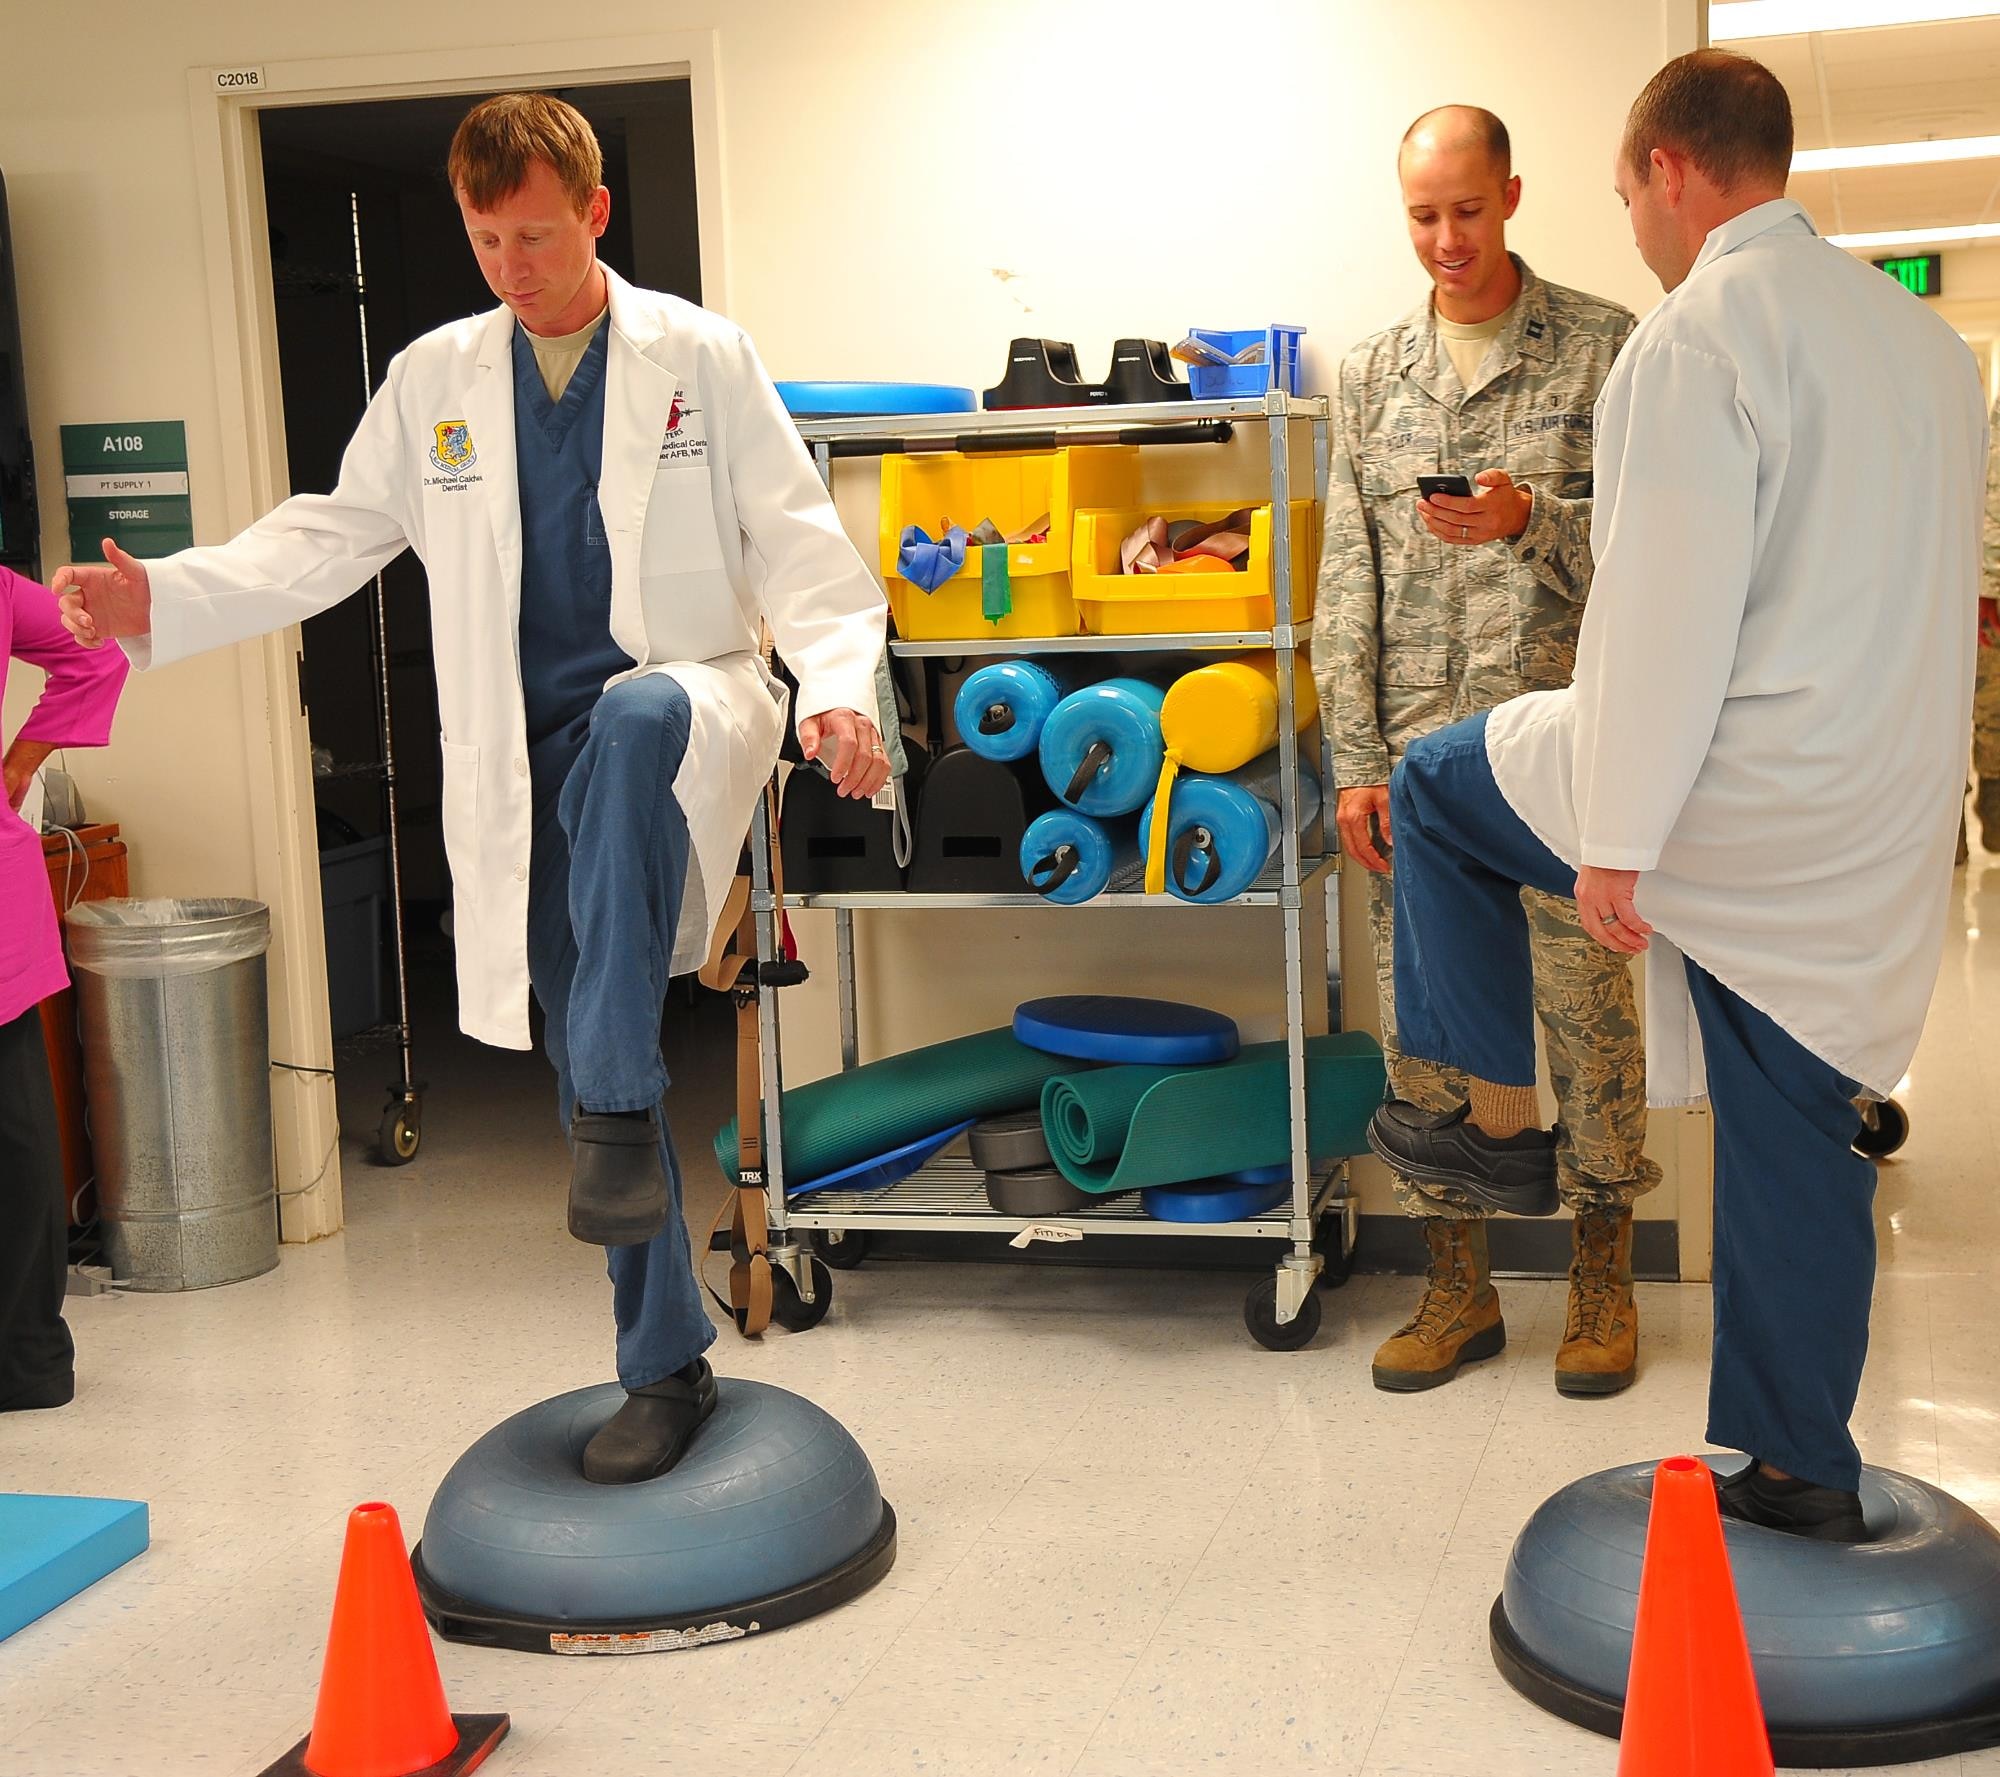 Captains Kyle Caldwell and Richard Waddell, both the 78th Medical Group dentists, stand on the balance trainer ball competition during the Physical Therapy open house, Oct 26, 2016. To obser the National Physical Therapy month, 78th Med Group hosted an open house on the second floor of the Medical Group facility. (U.S. Air Force photo by Misuzu Allen)